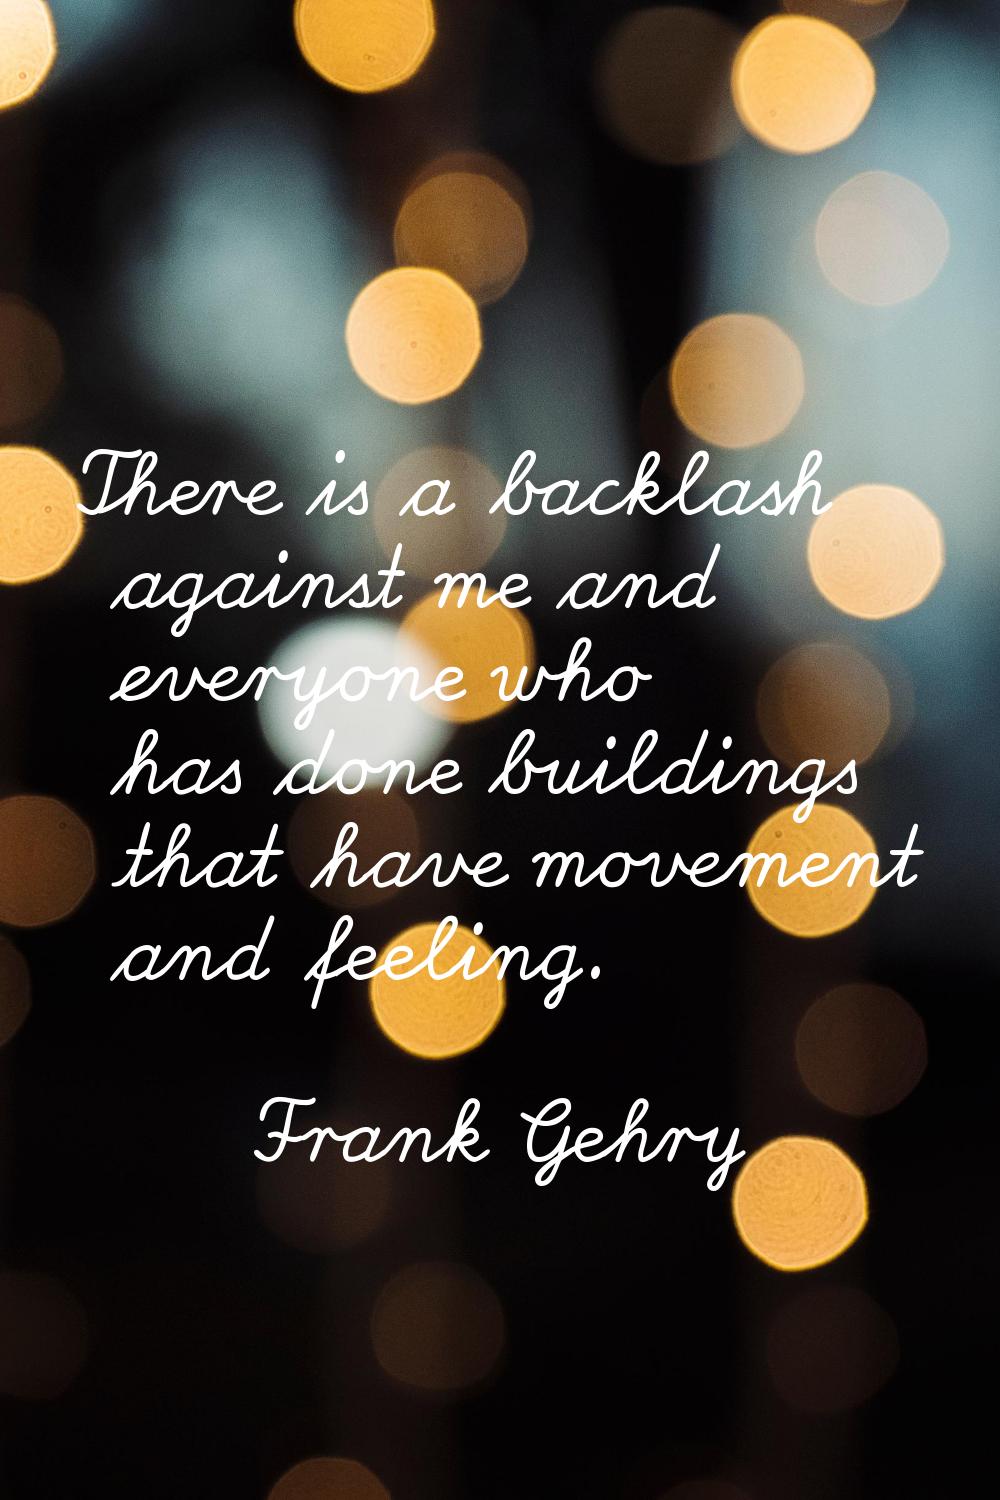 There is a backlash against me and everyone who has done buildings that have movement and feeling.